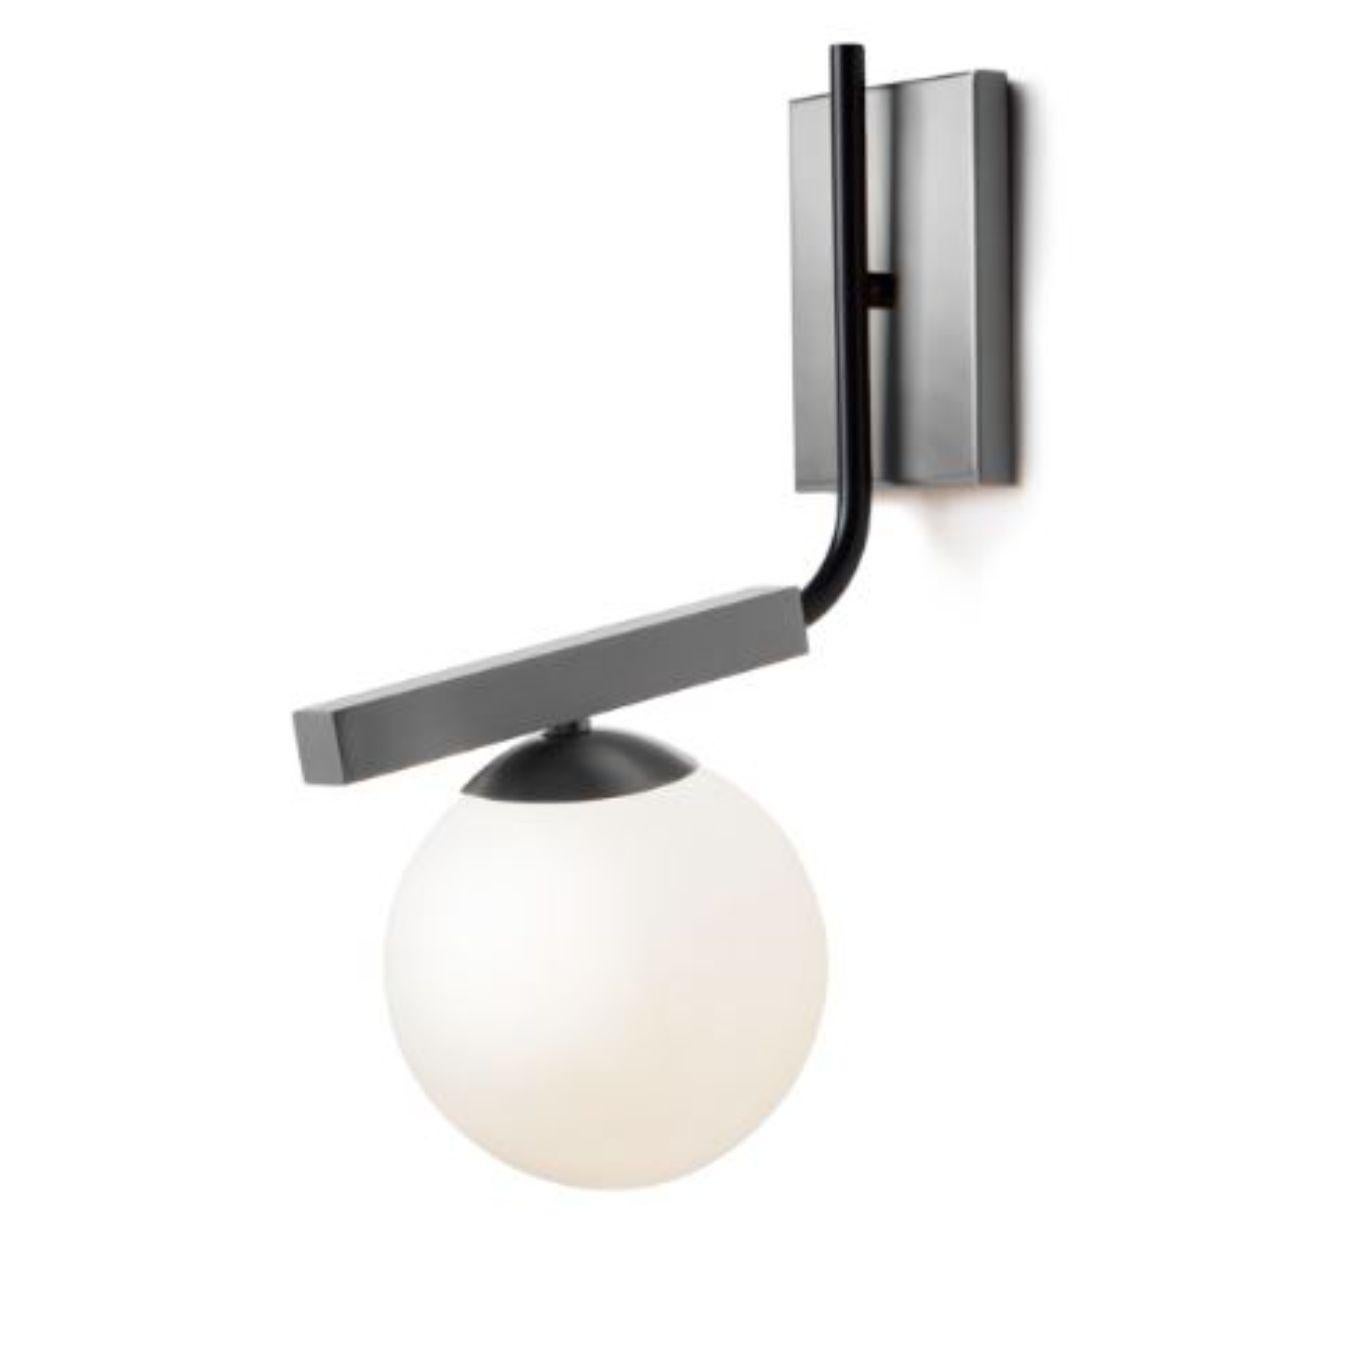 Nickel Globe wall lamp by Dooq
Dimensions: W 15 x D 26 x H 40 cm
Materials: lacquered metal, polished or brushed metal, nickel.
Also available in different colors and materials. 

Information:
230V/50Hz
1 x max. G9
4W LED

120V/60Hz
1 x max. G9
4W